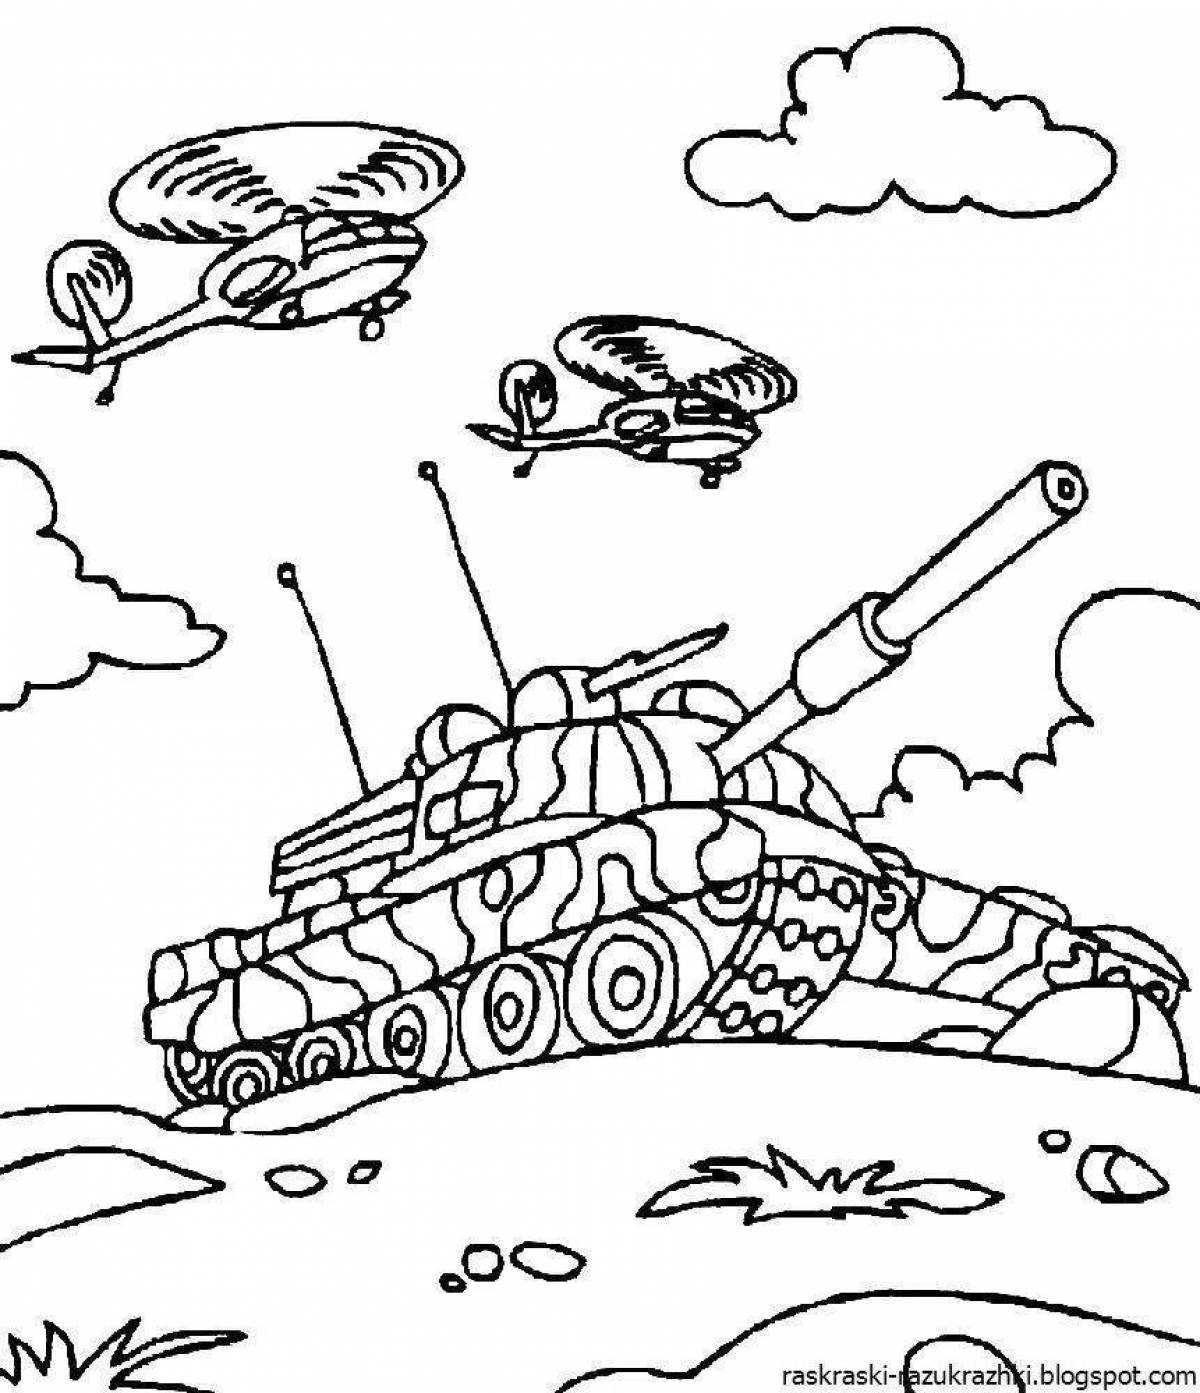 Glorious military coloring book for 5-6 year olds